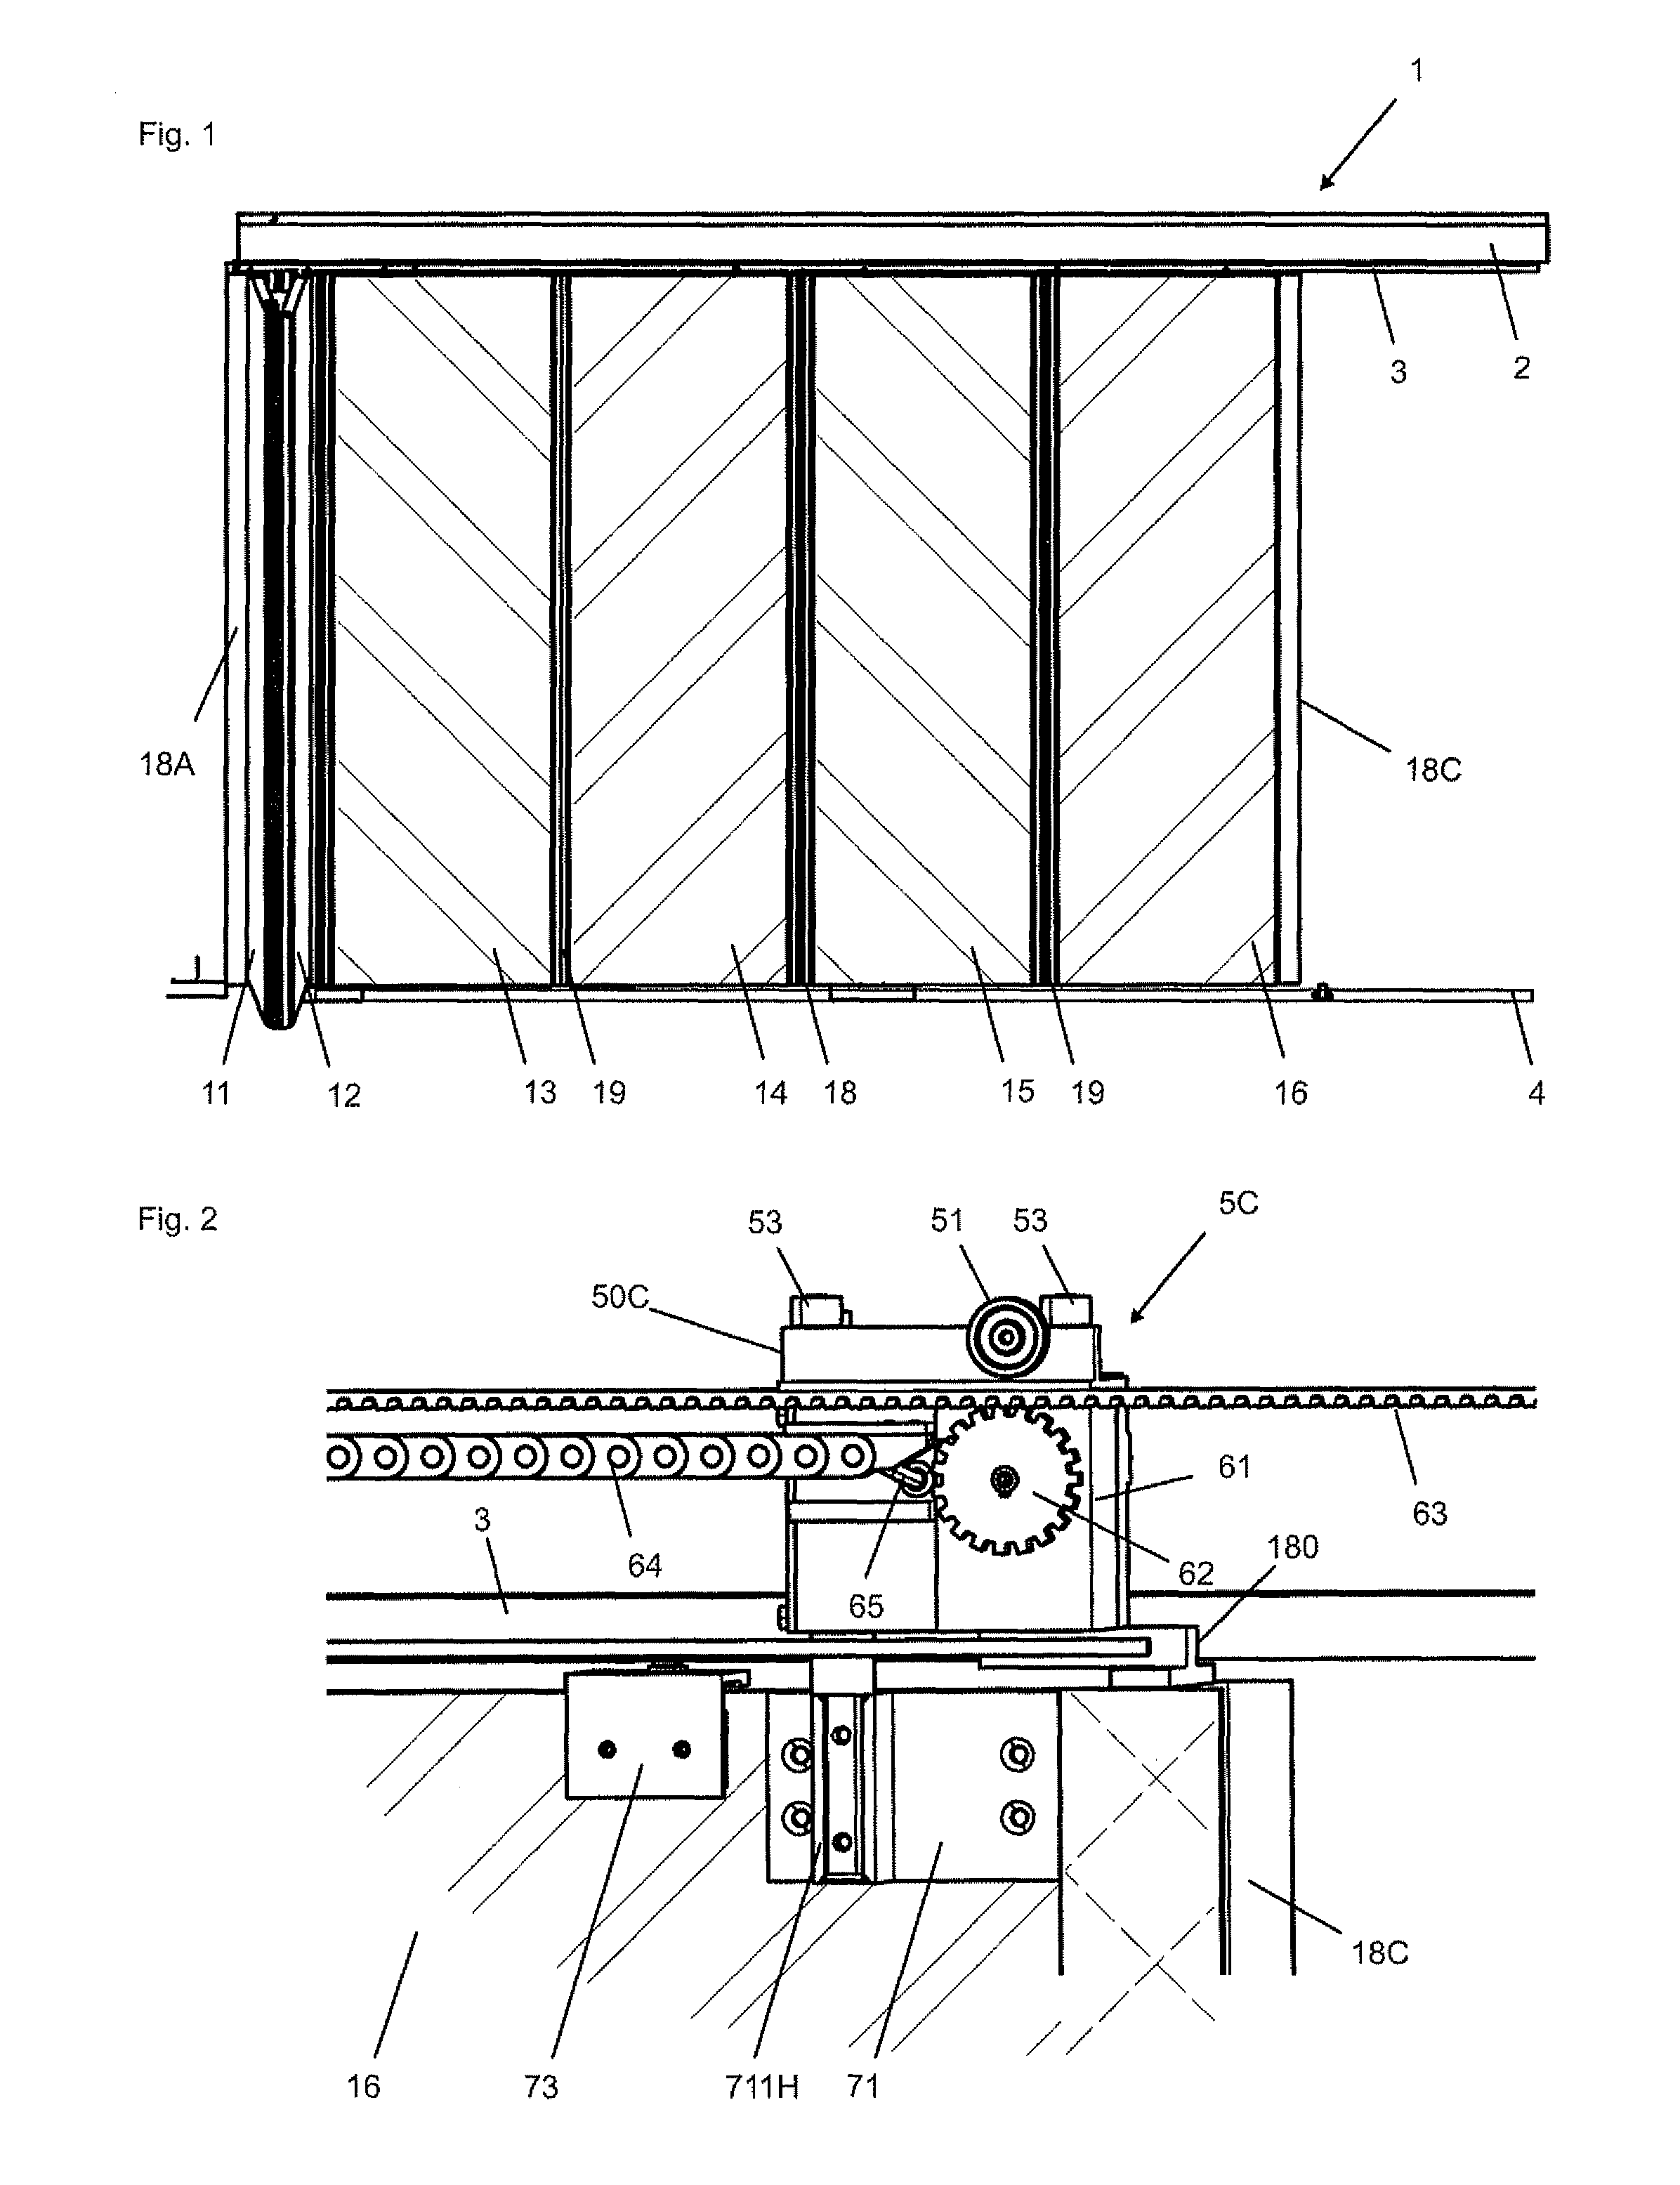 Foldable sliding wall and carriage